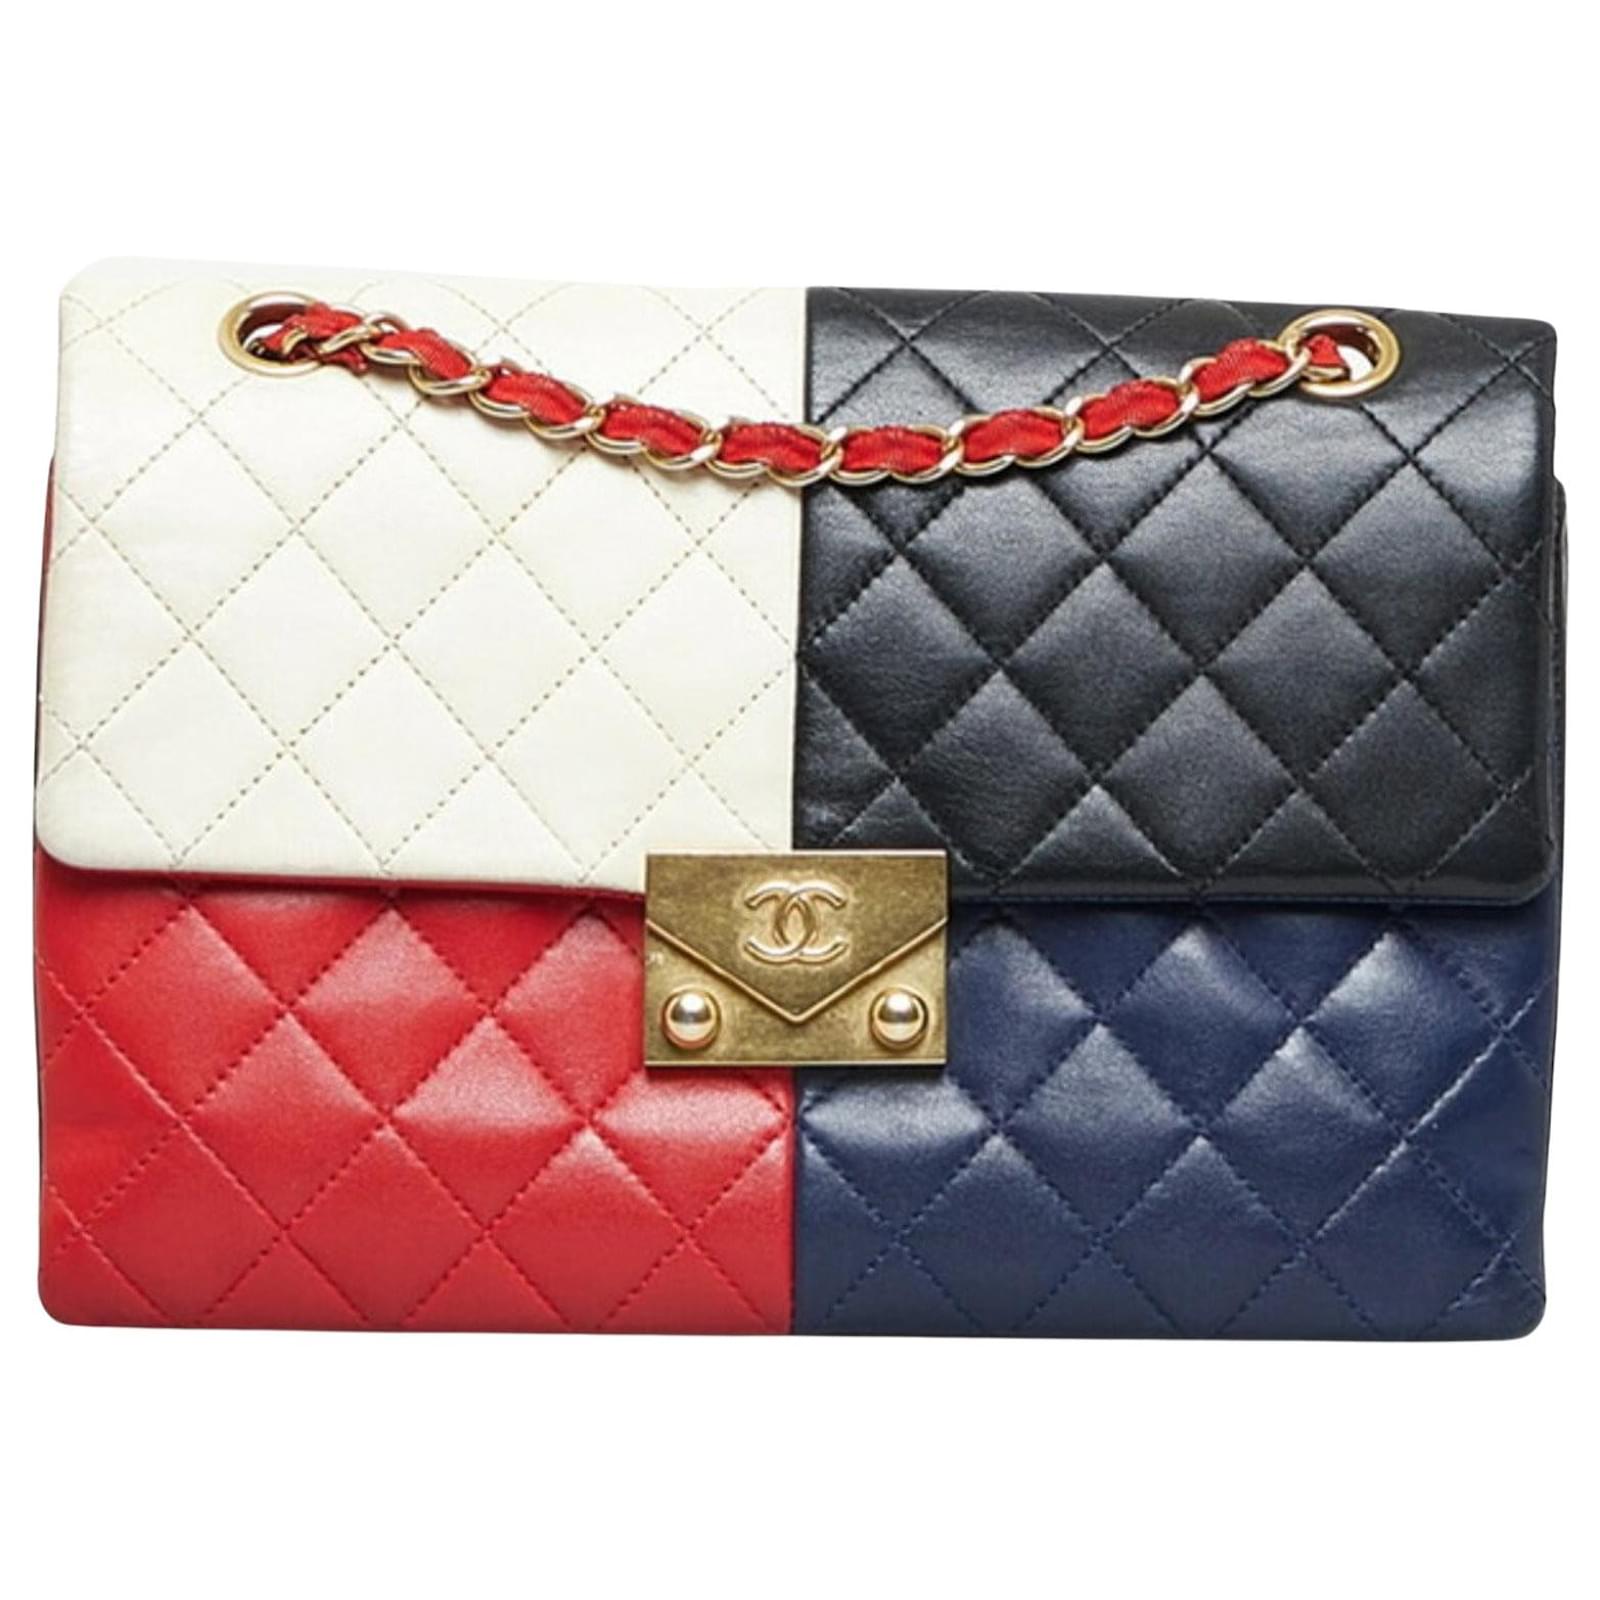 Chanel Multicolor Quilted Leather Color Block Medium Flap Bag